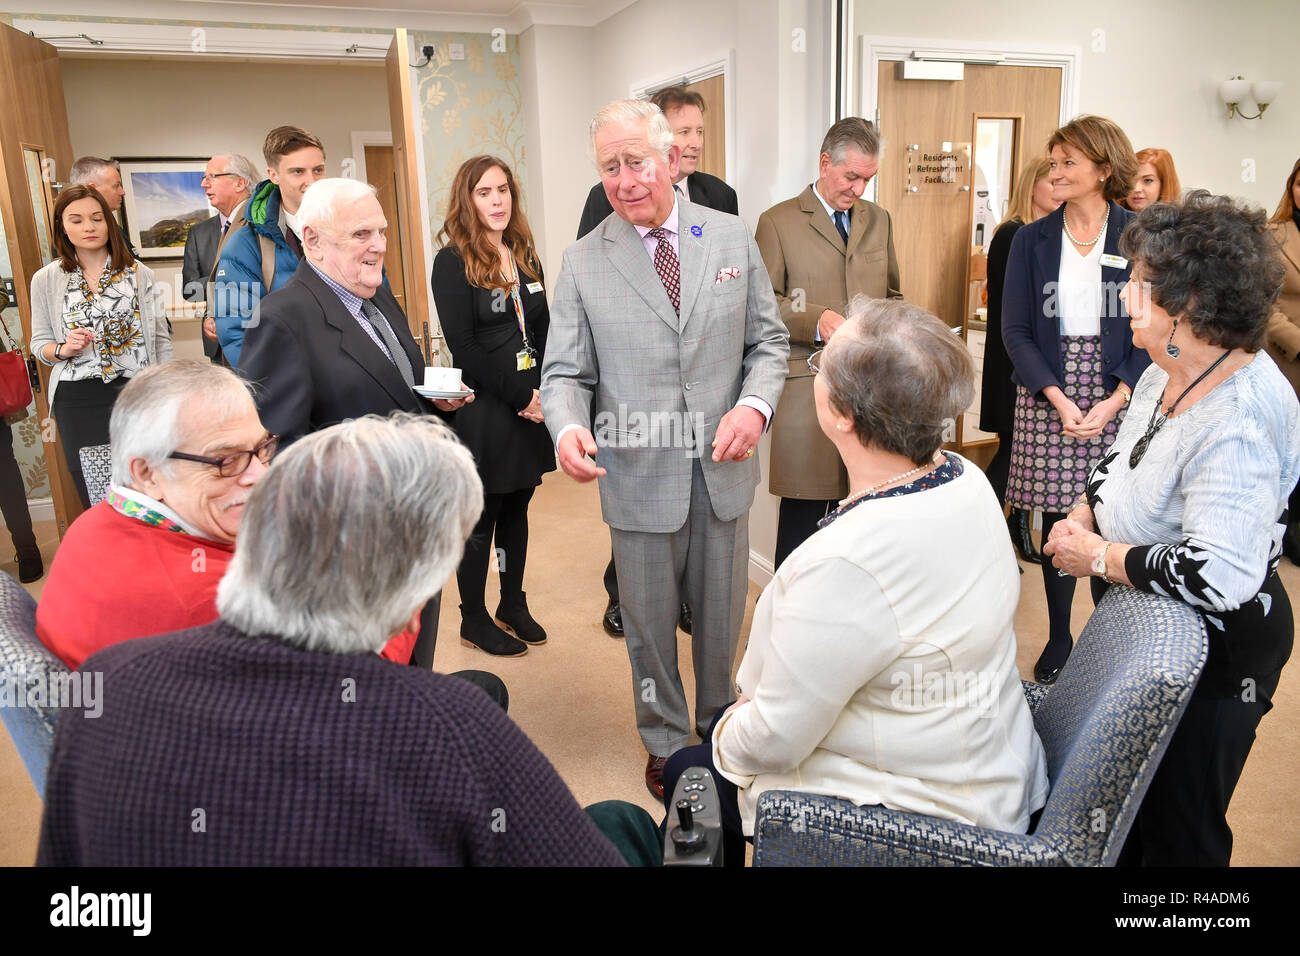 The Prince of Wales chats with residents at Yarlington Housing Group's new Extra Care housing development in Poundbury, Dorset, where he is opening the development and Dorchester Community Church. Stock Photo